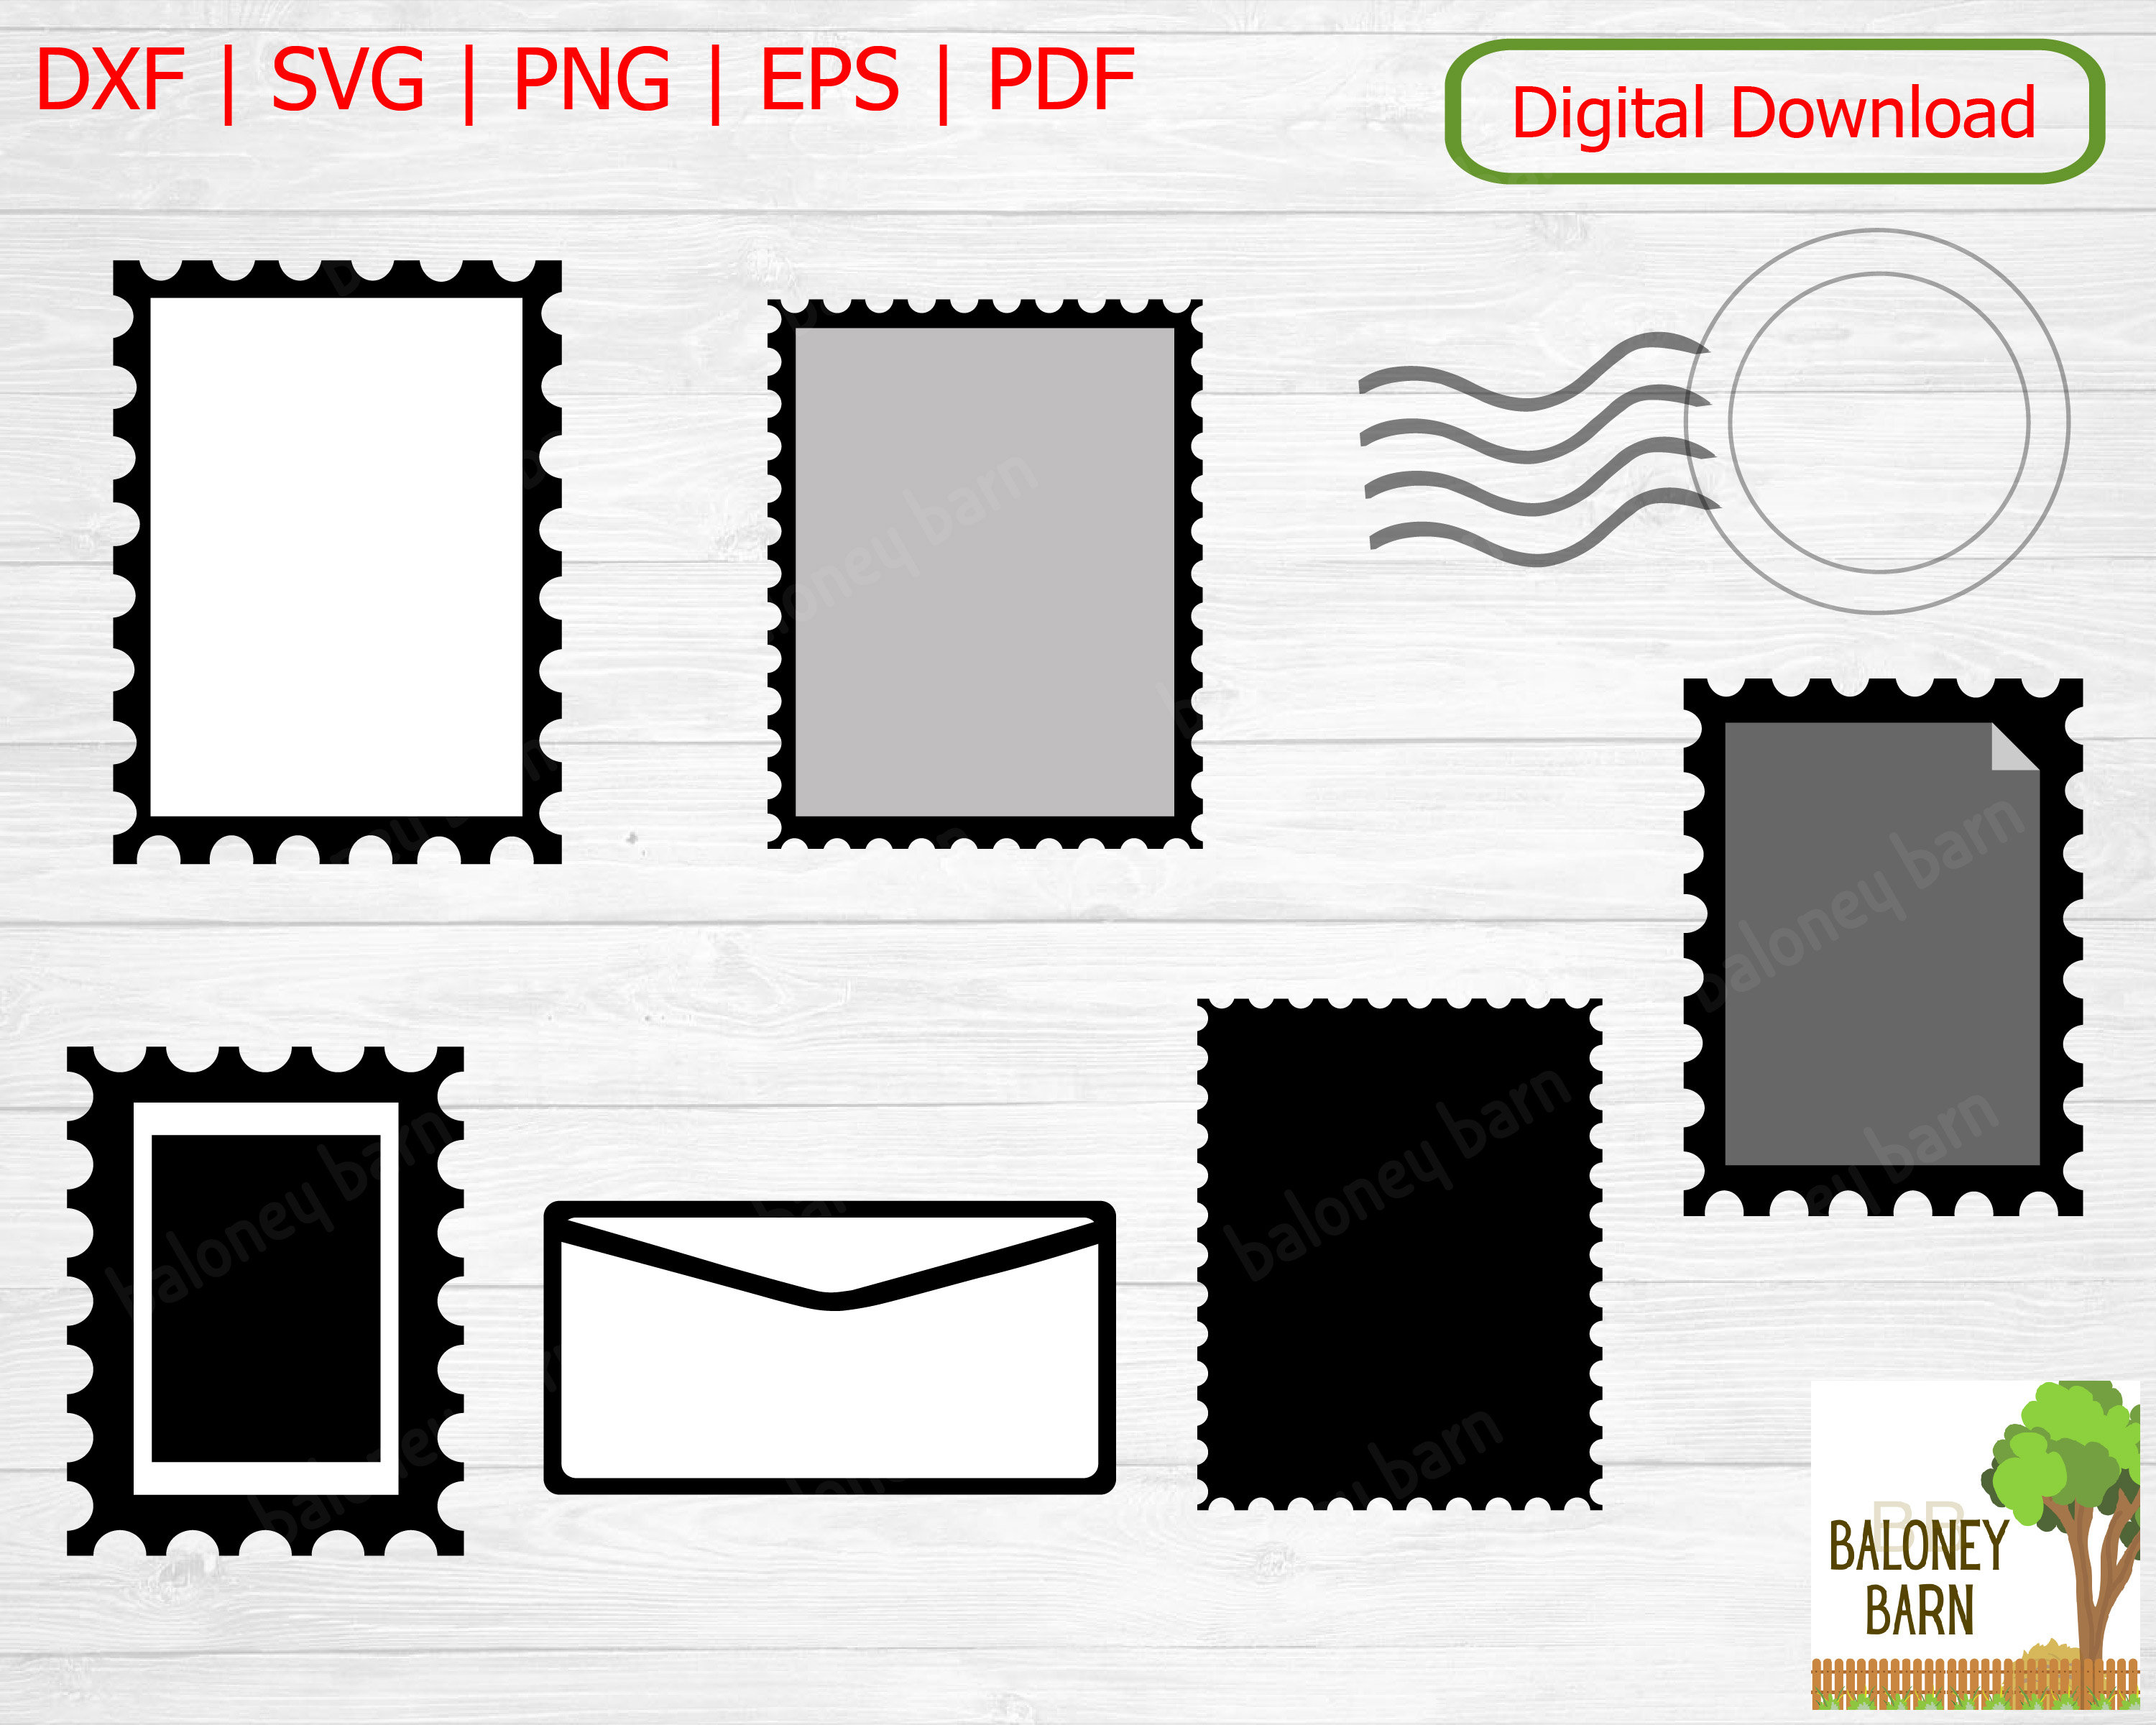 Blank Post Stamps, Vector Illustration Royalty Free SVG, Cliparts, Vectors,  and Stock Illustration. Image 19375848.